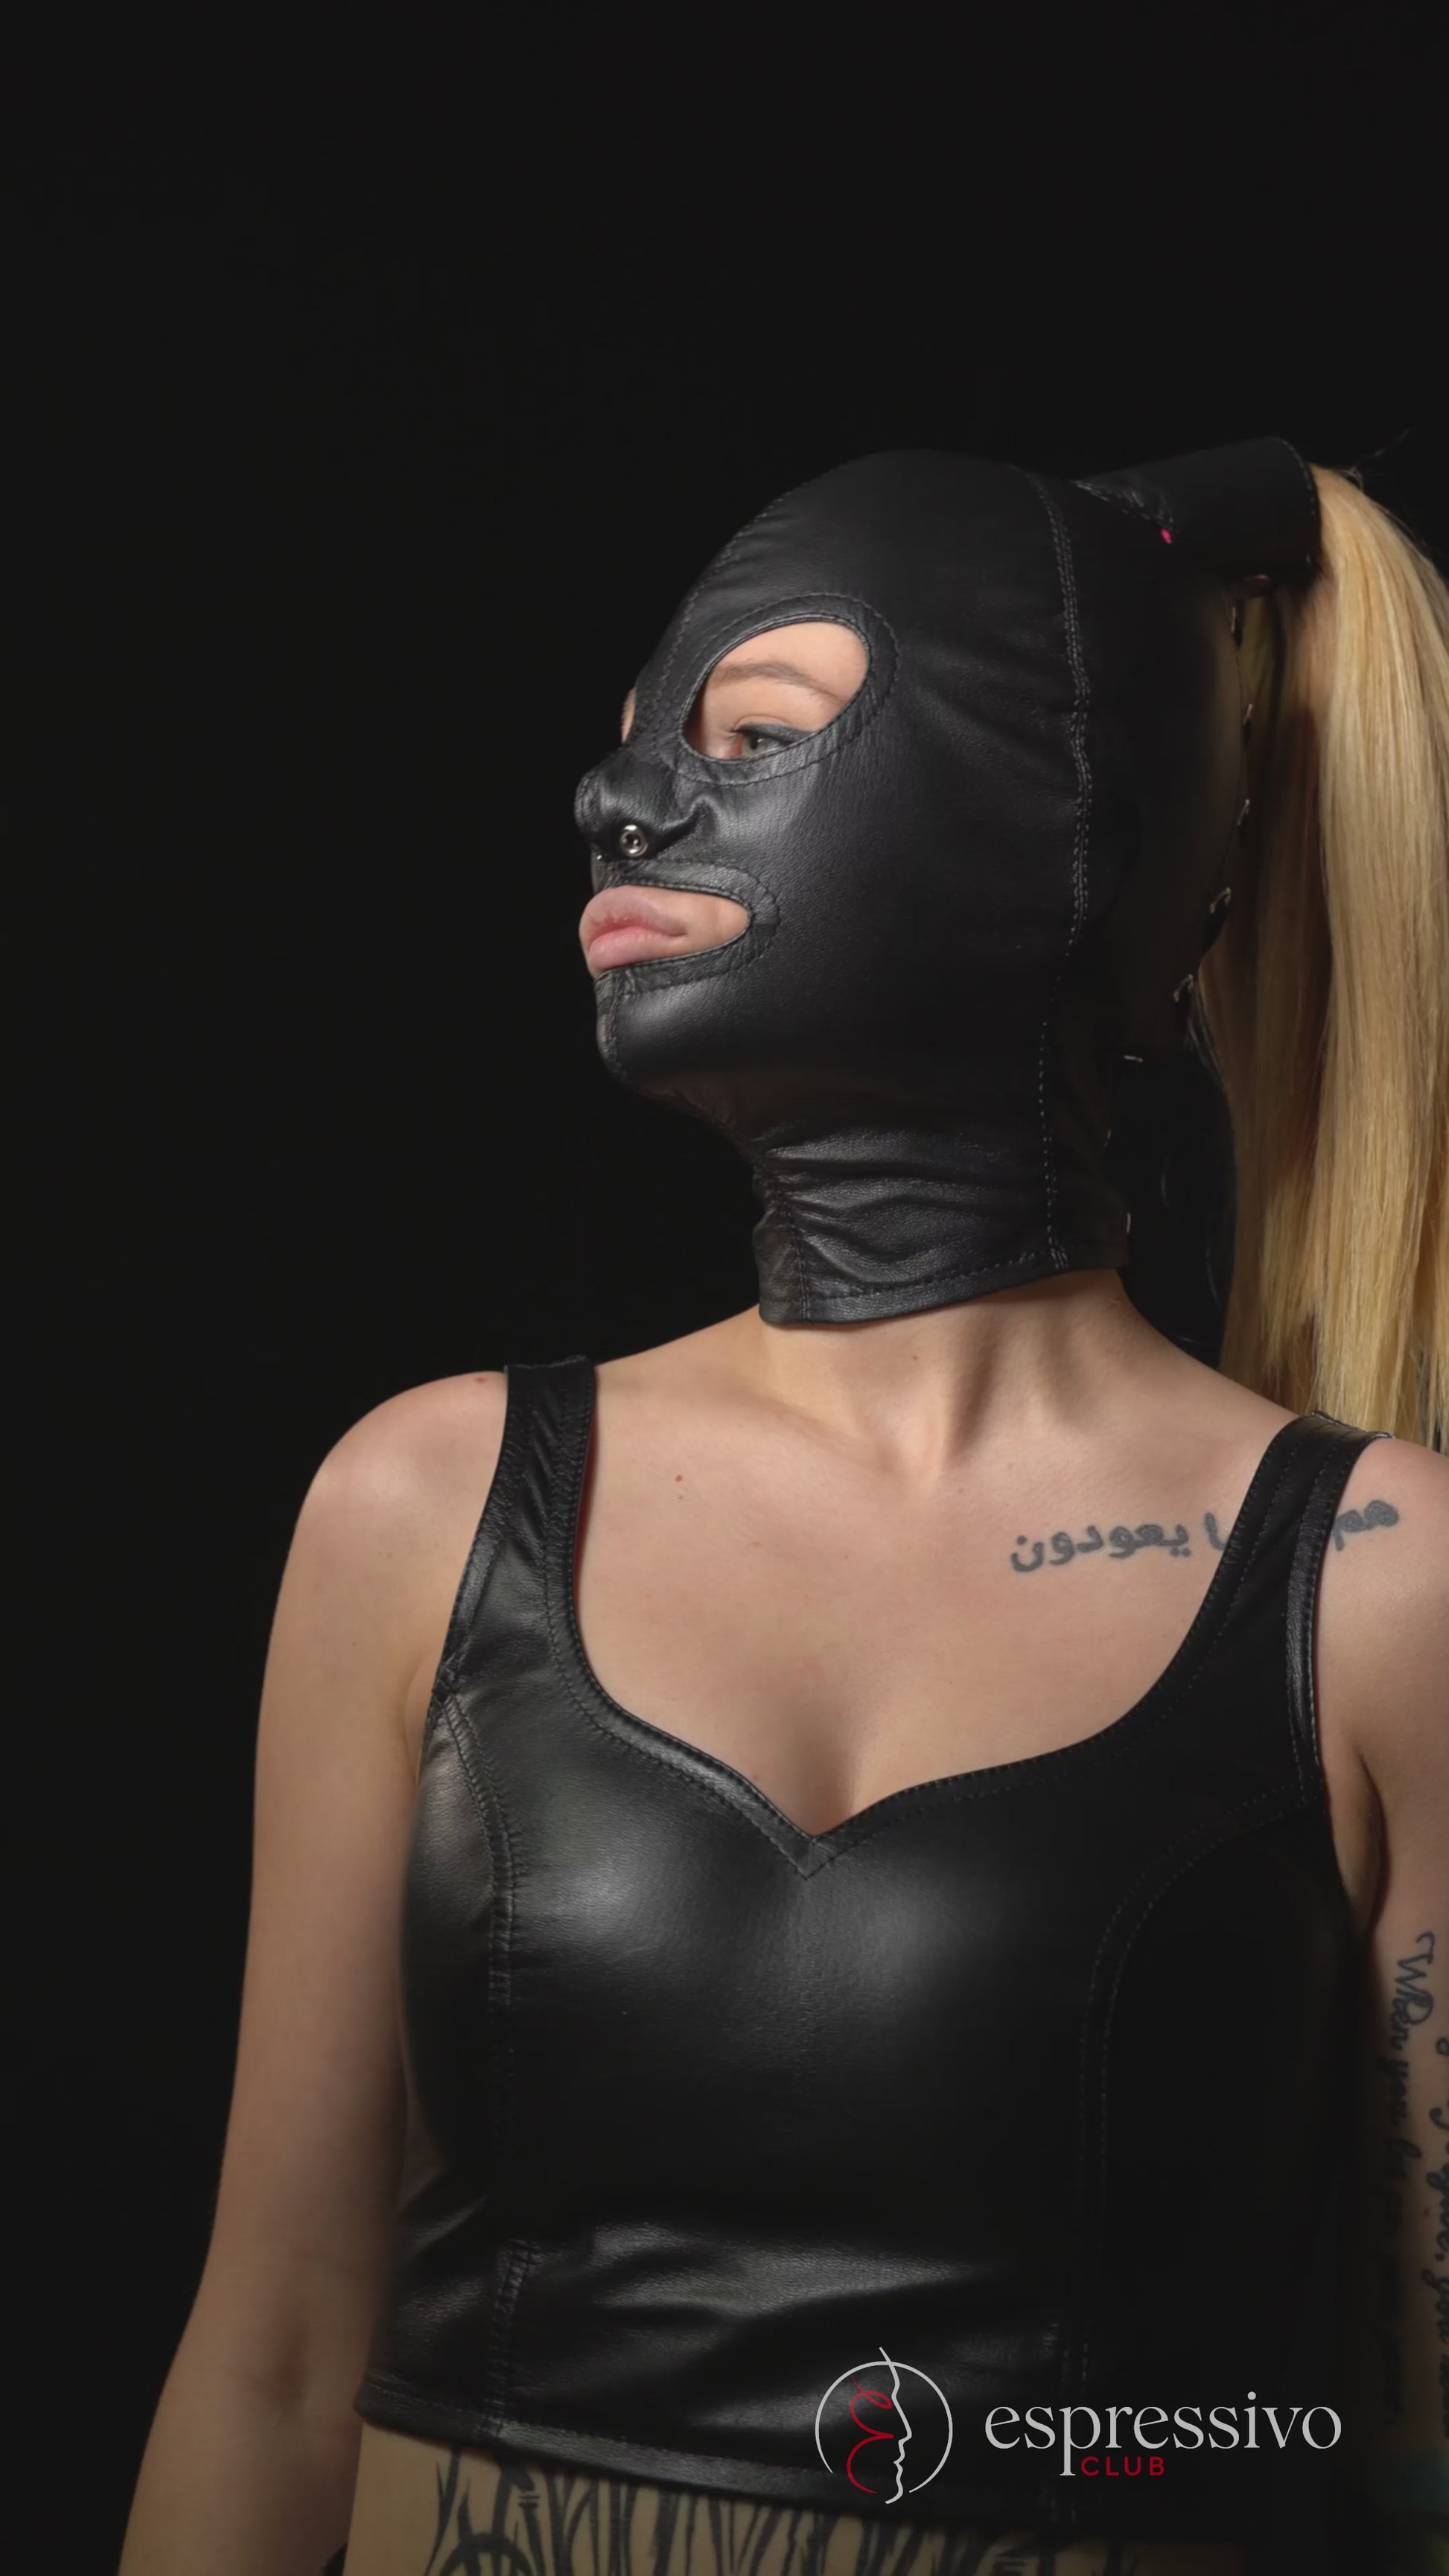 Real Leather BDSM Tight Ponytail Hood with Blindfold & Muffle Gag Mask Video